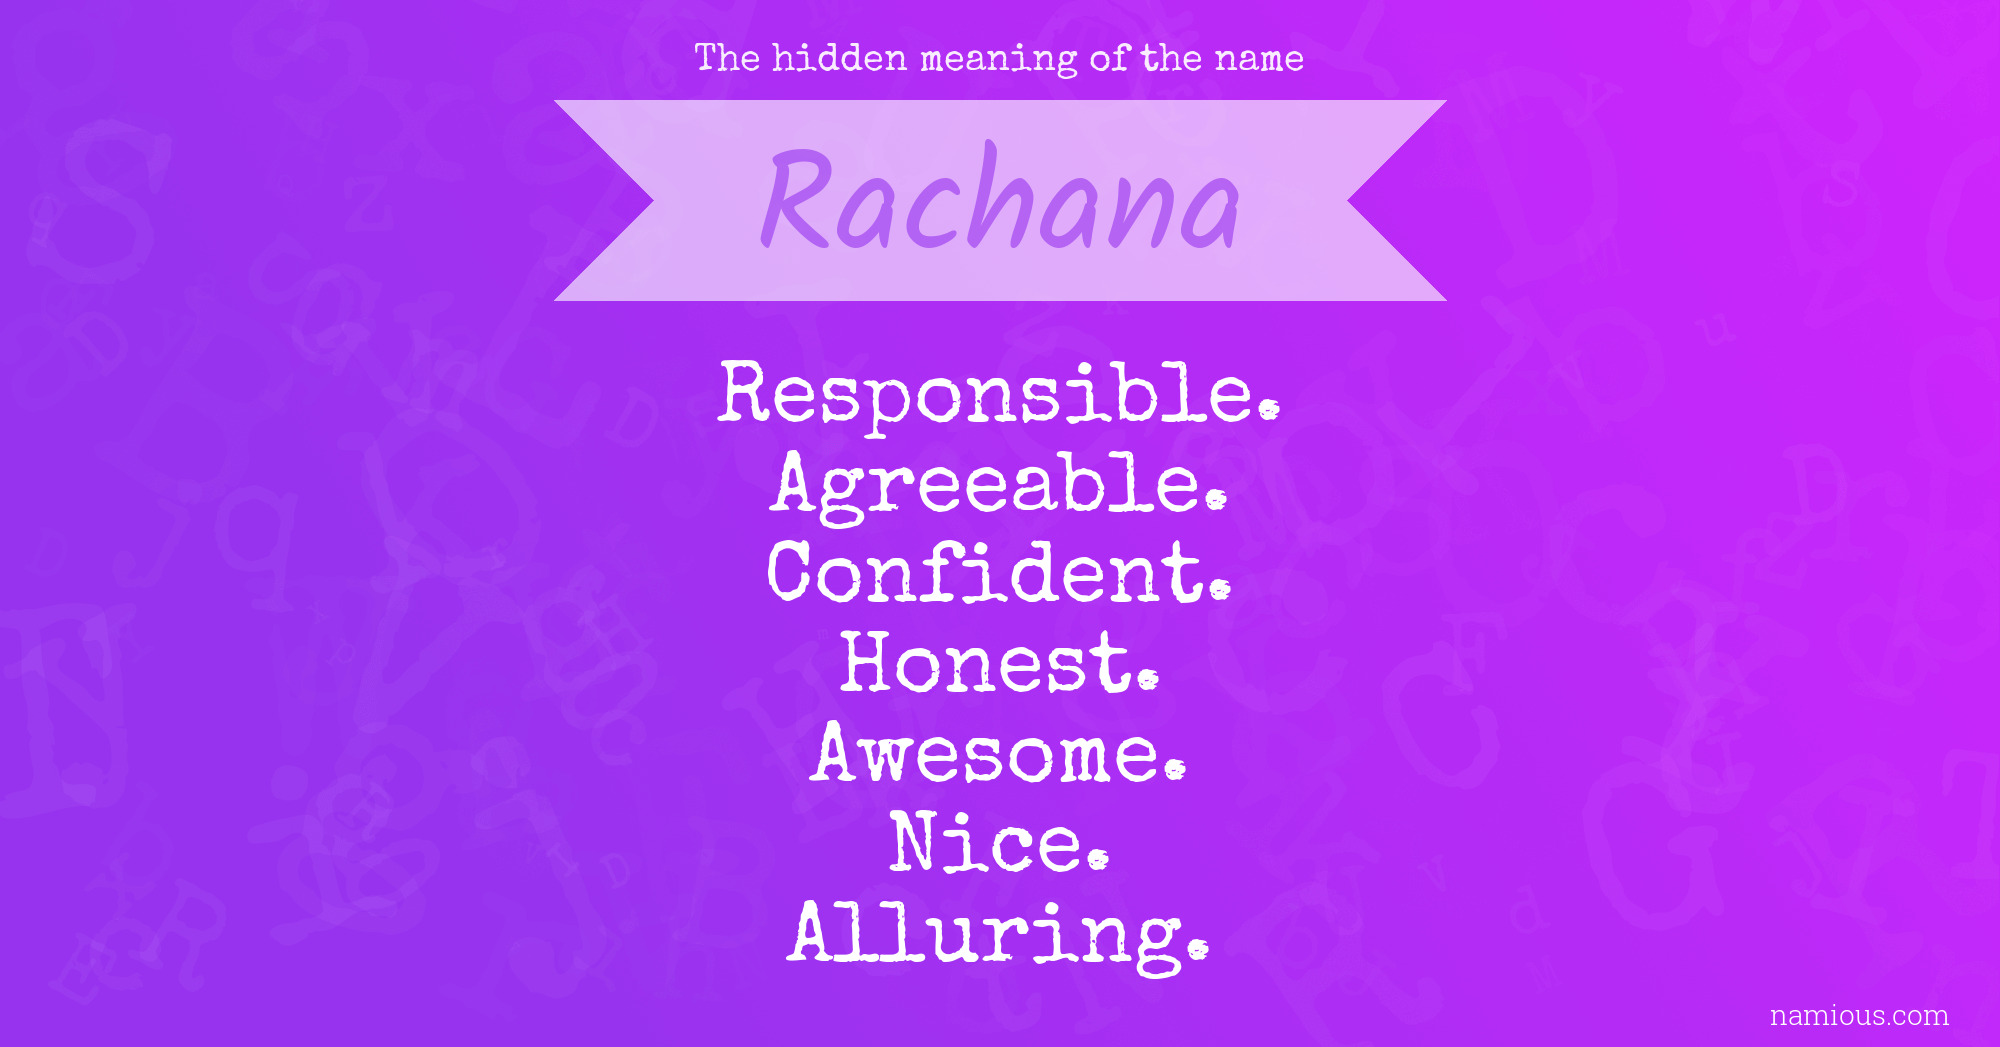 The hidden meaning of the name Rachana